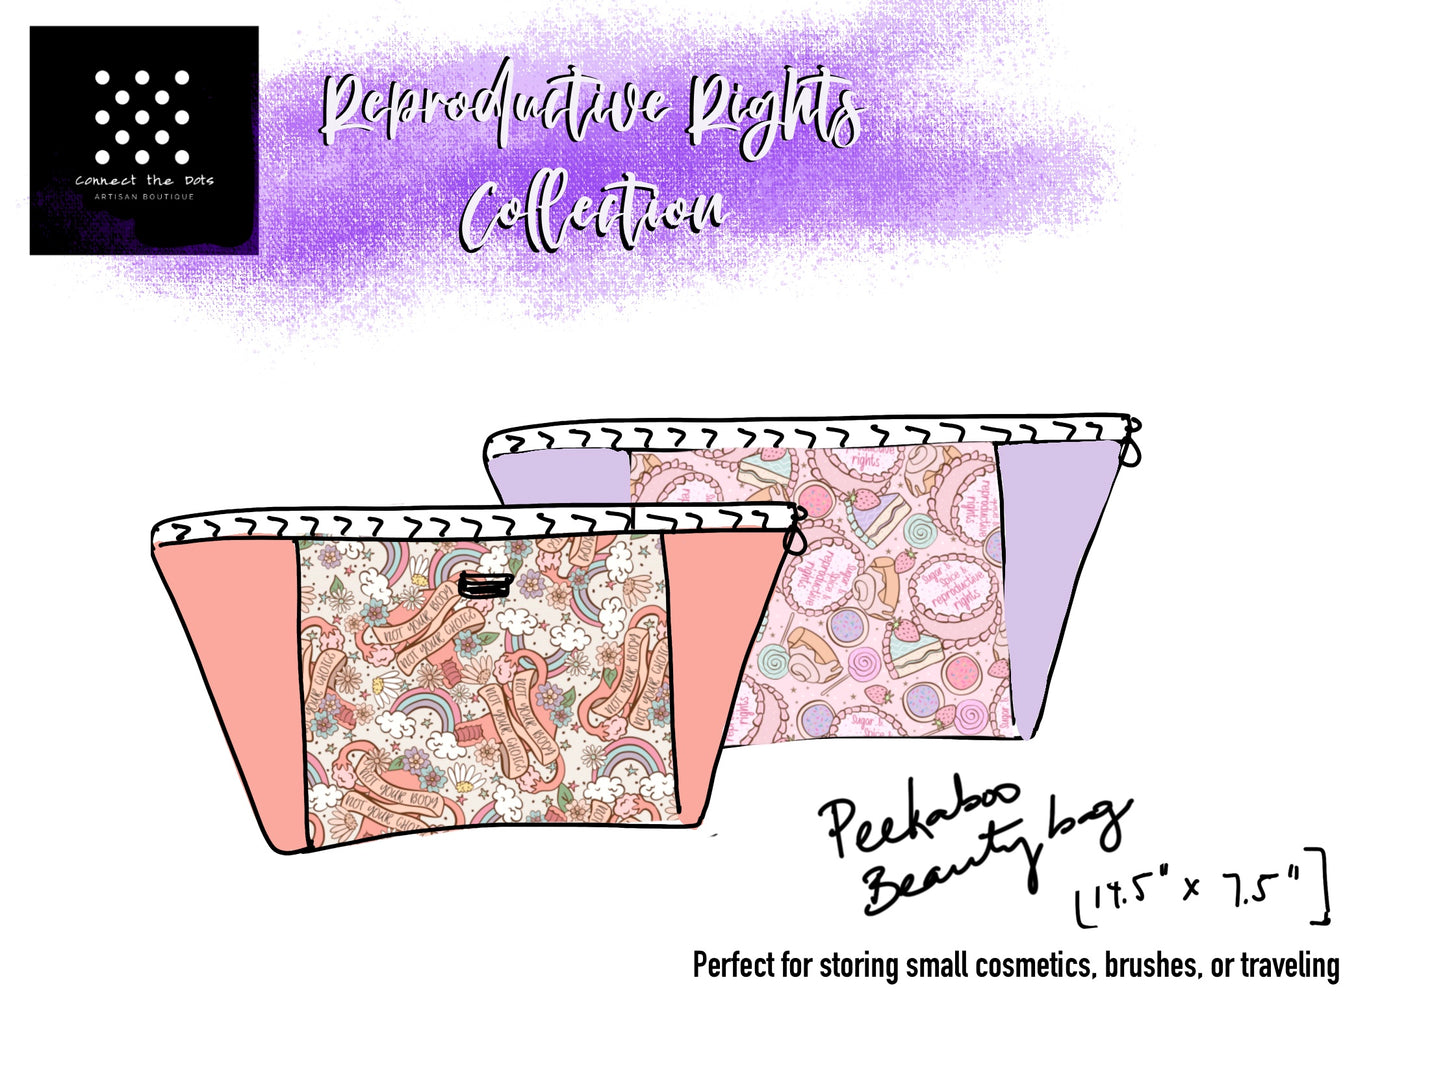 Reproductive Rights: Toiletry/Vanity Bag